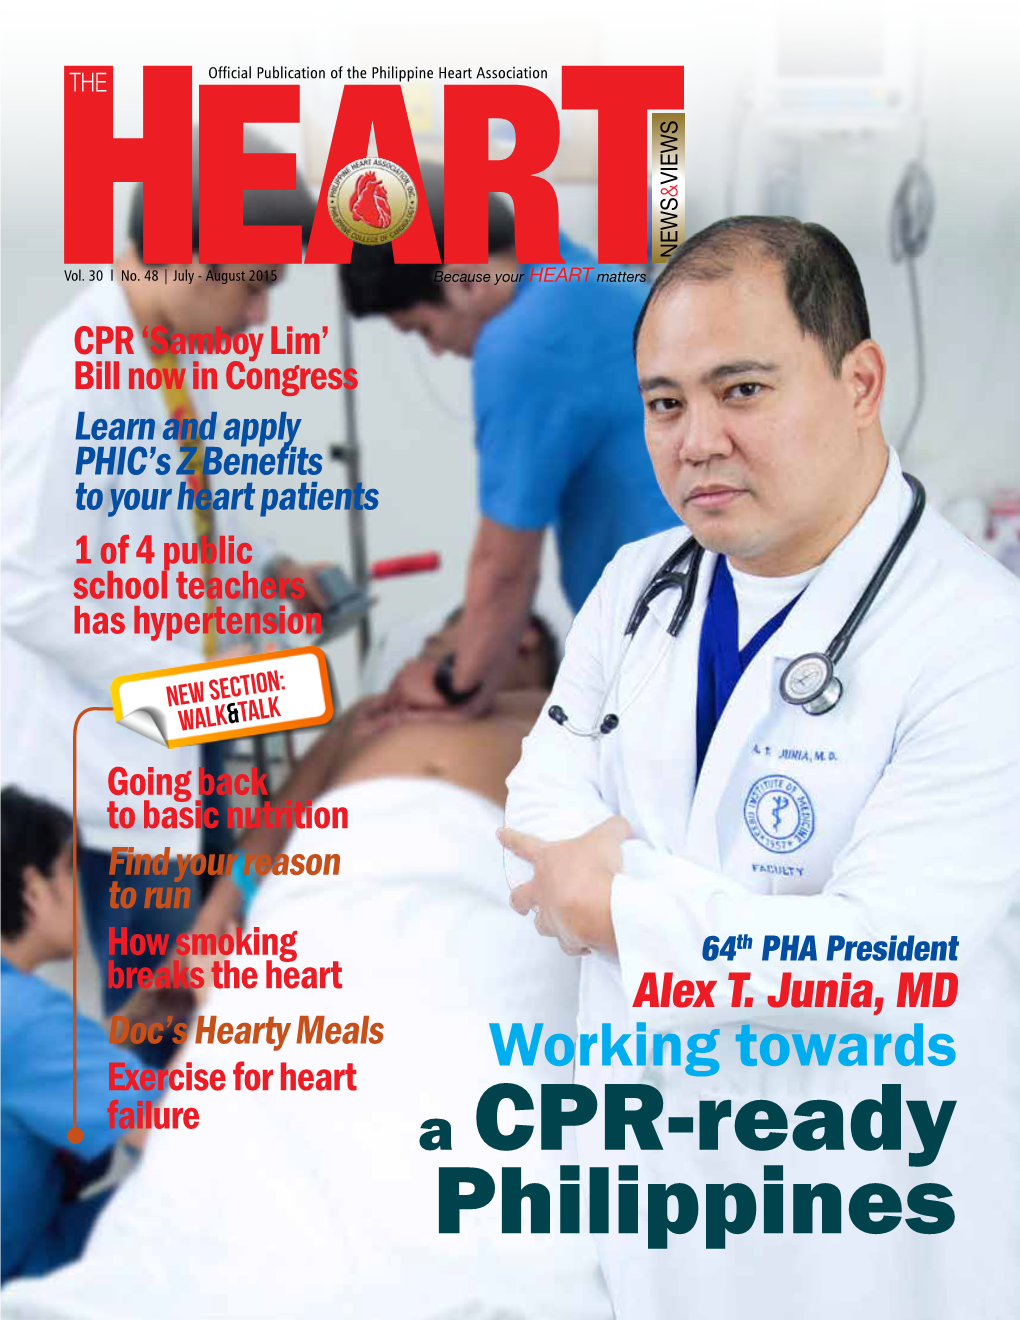 A CPR-Ready Philippines Learn CPR and Save Lives!